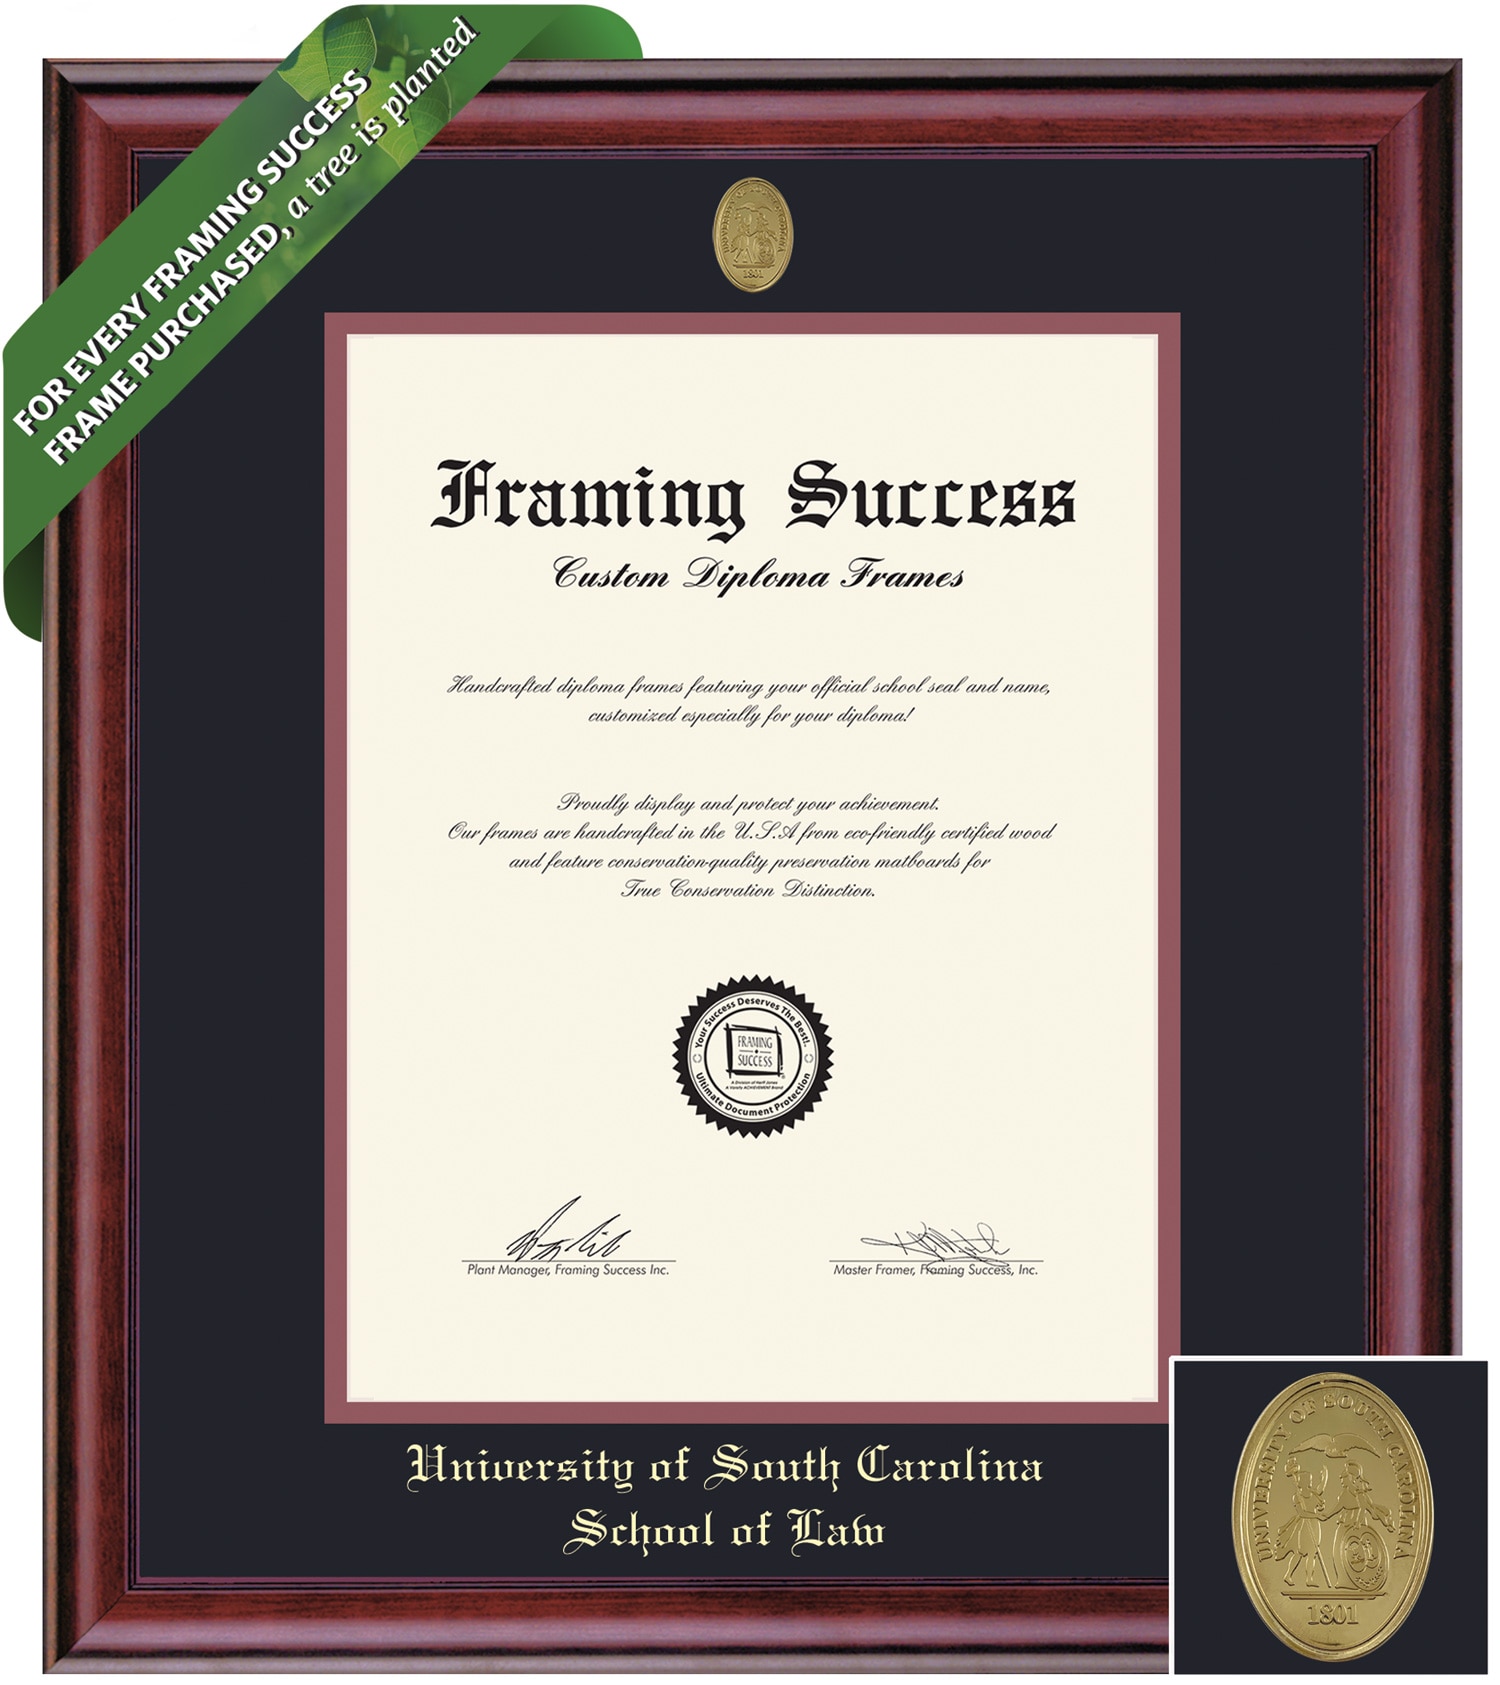 Framing Success 14 x 11 Classic Gold Medallion Law Diploma Frame